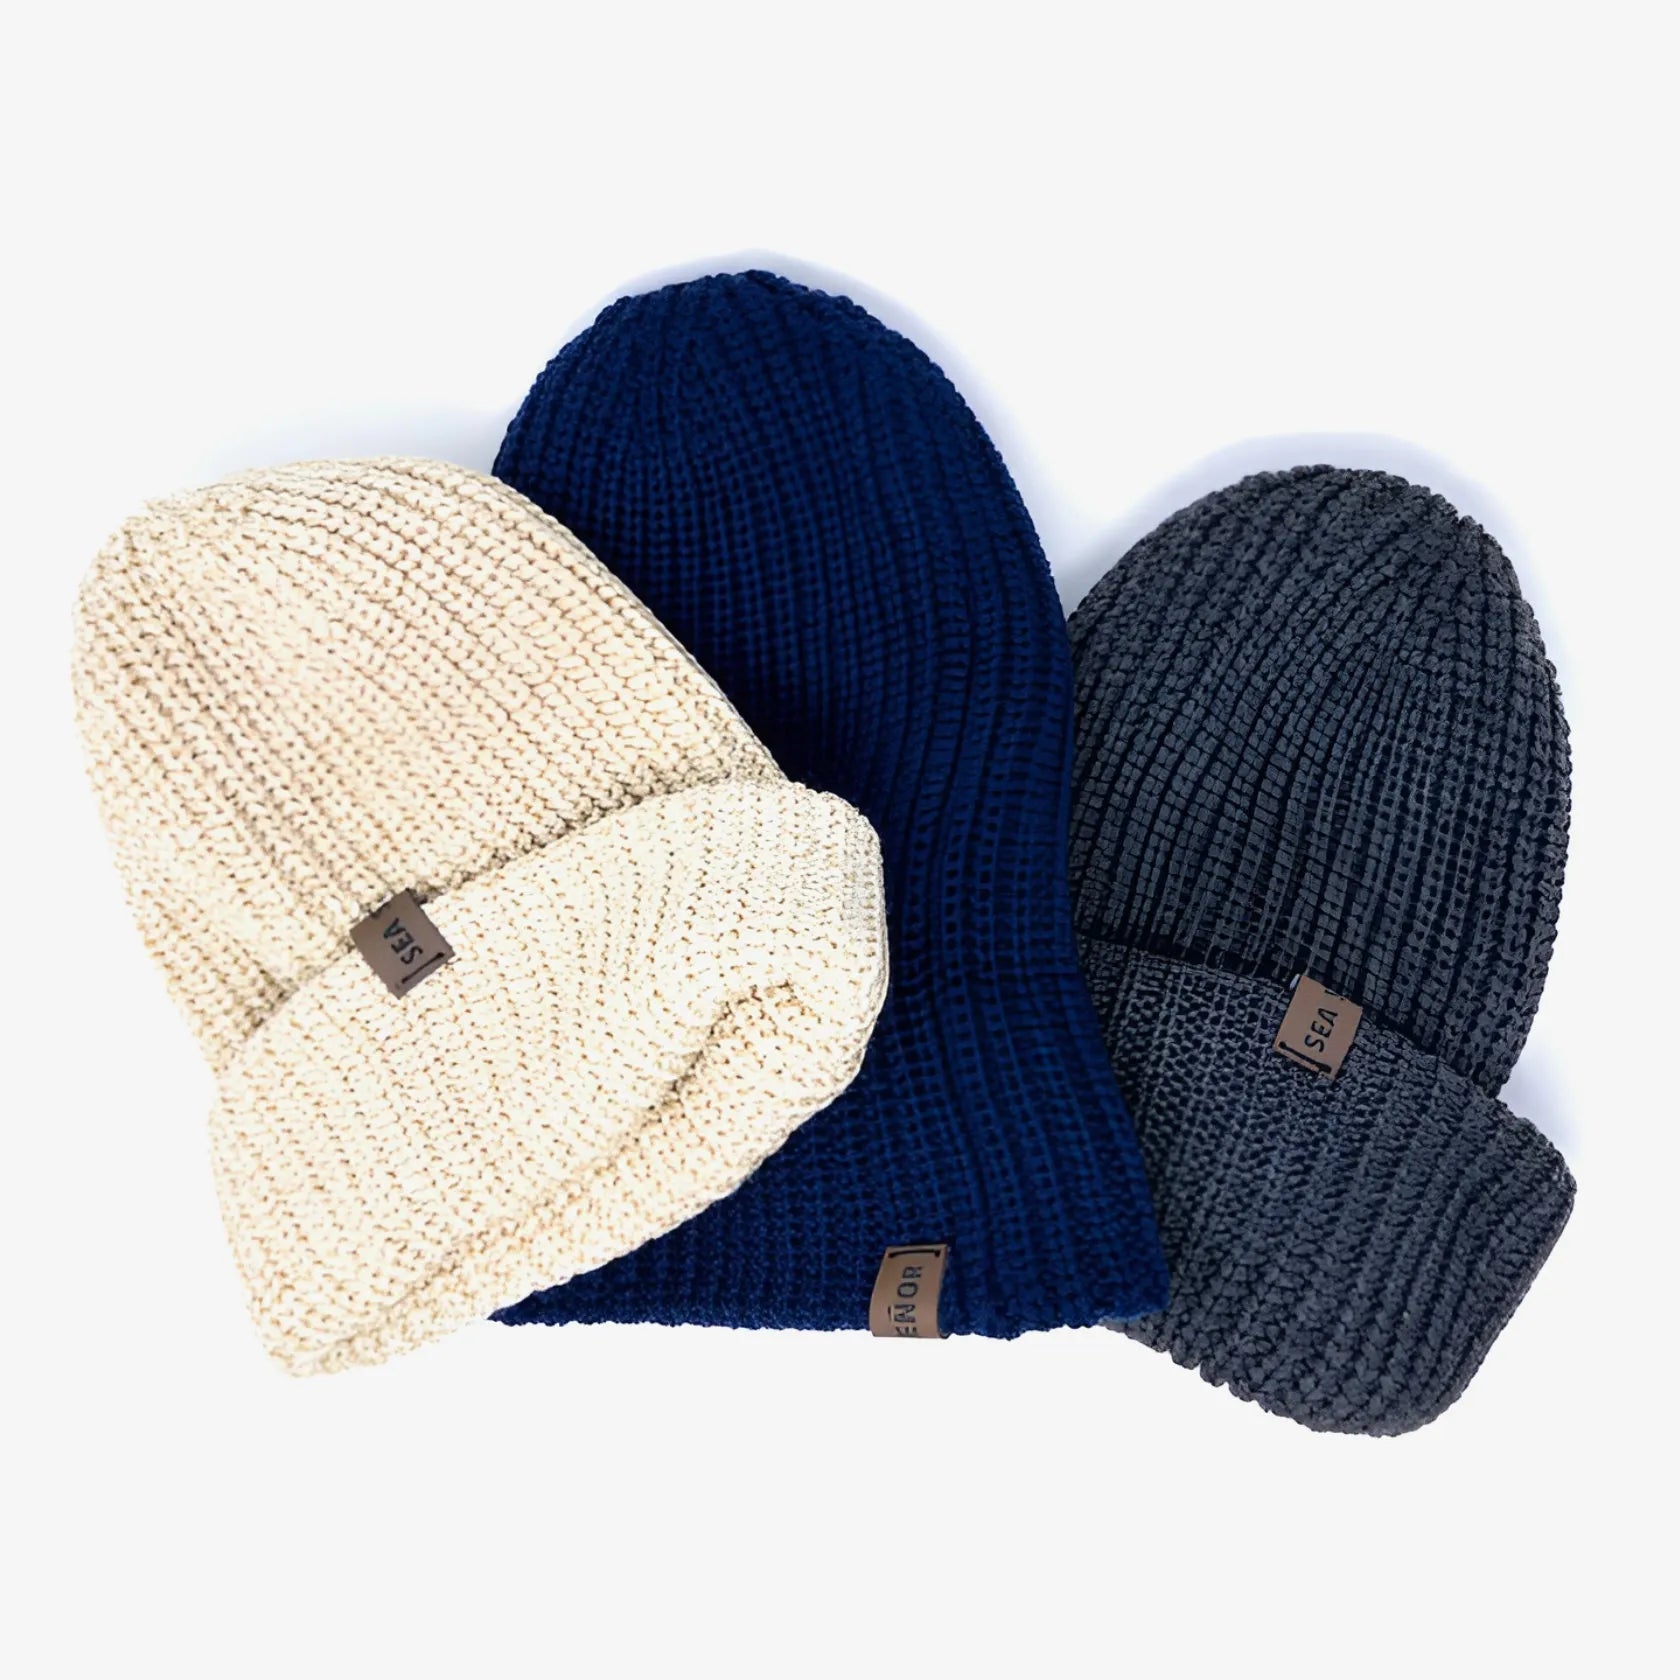 Knit Beanie - Sea Señor Outfitters